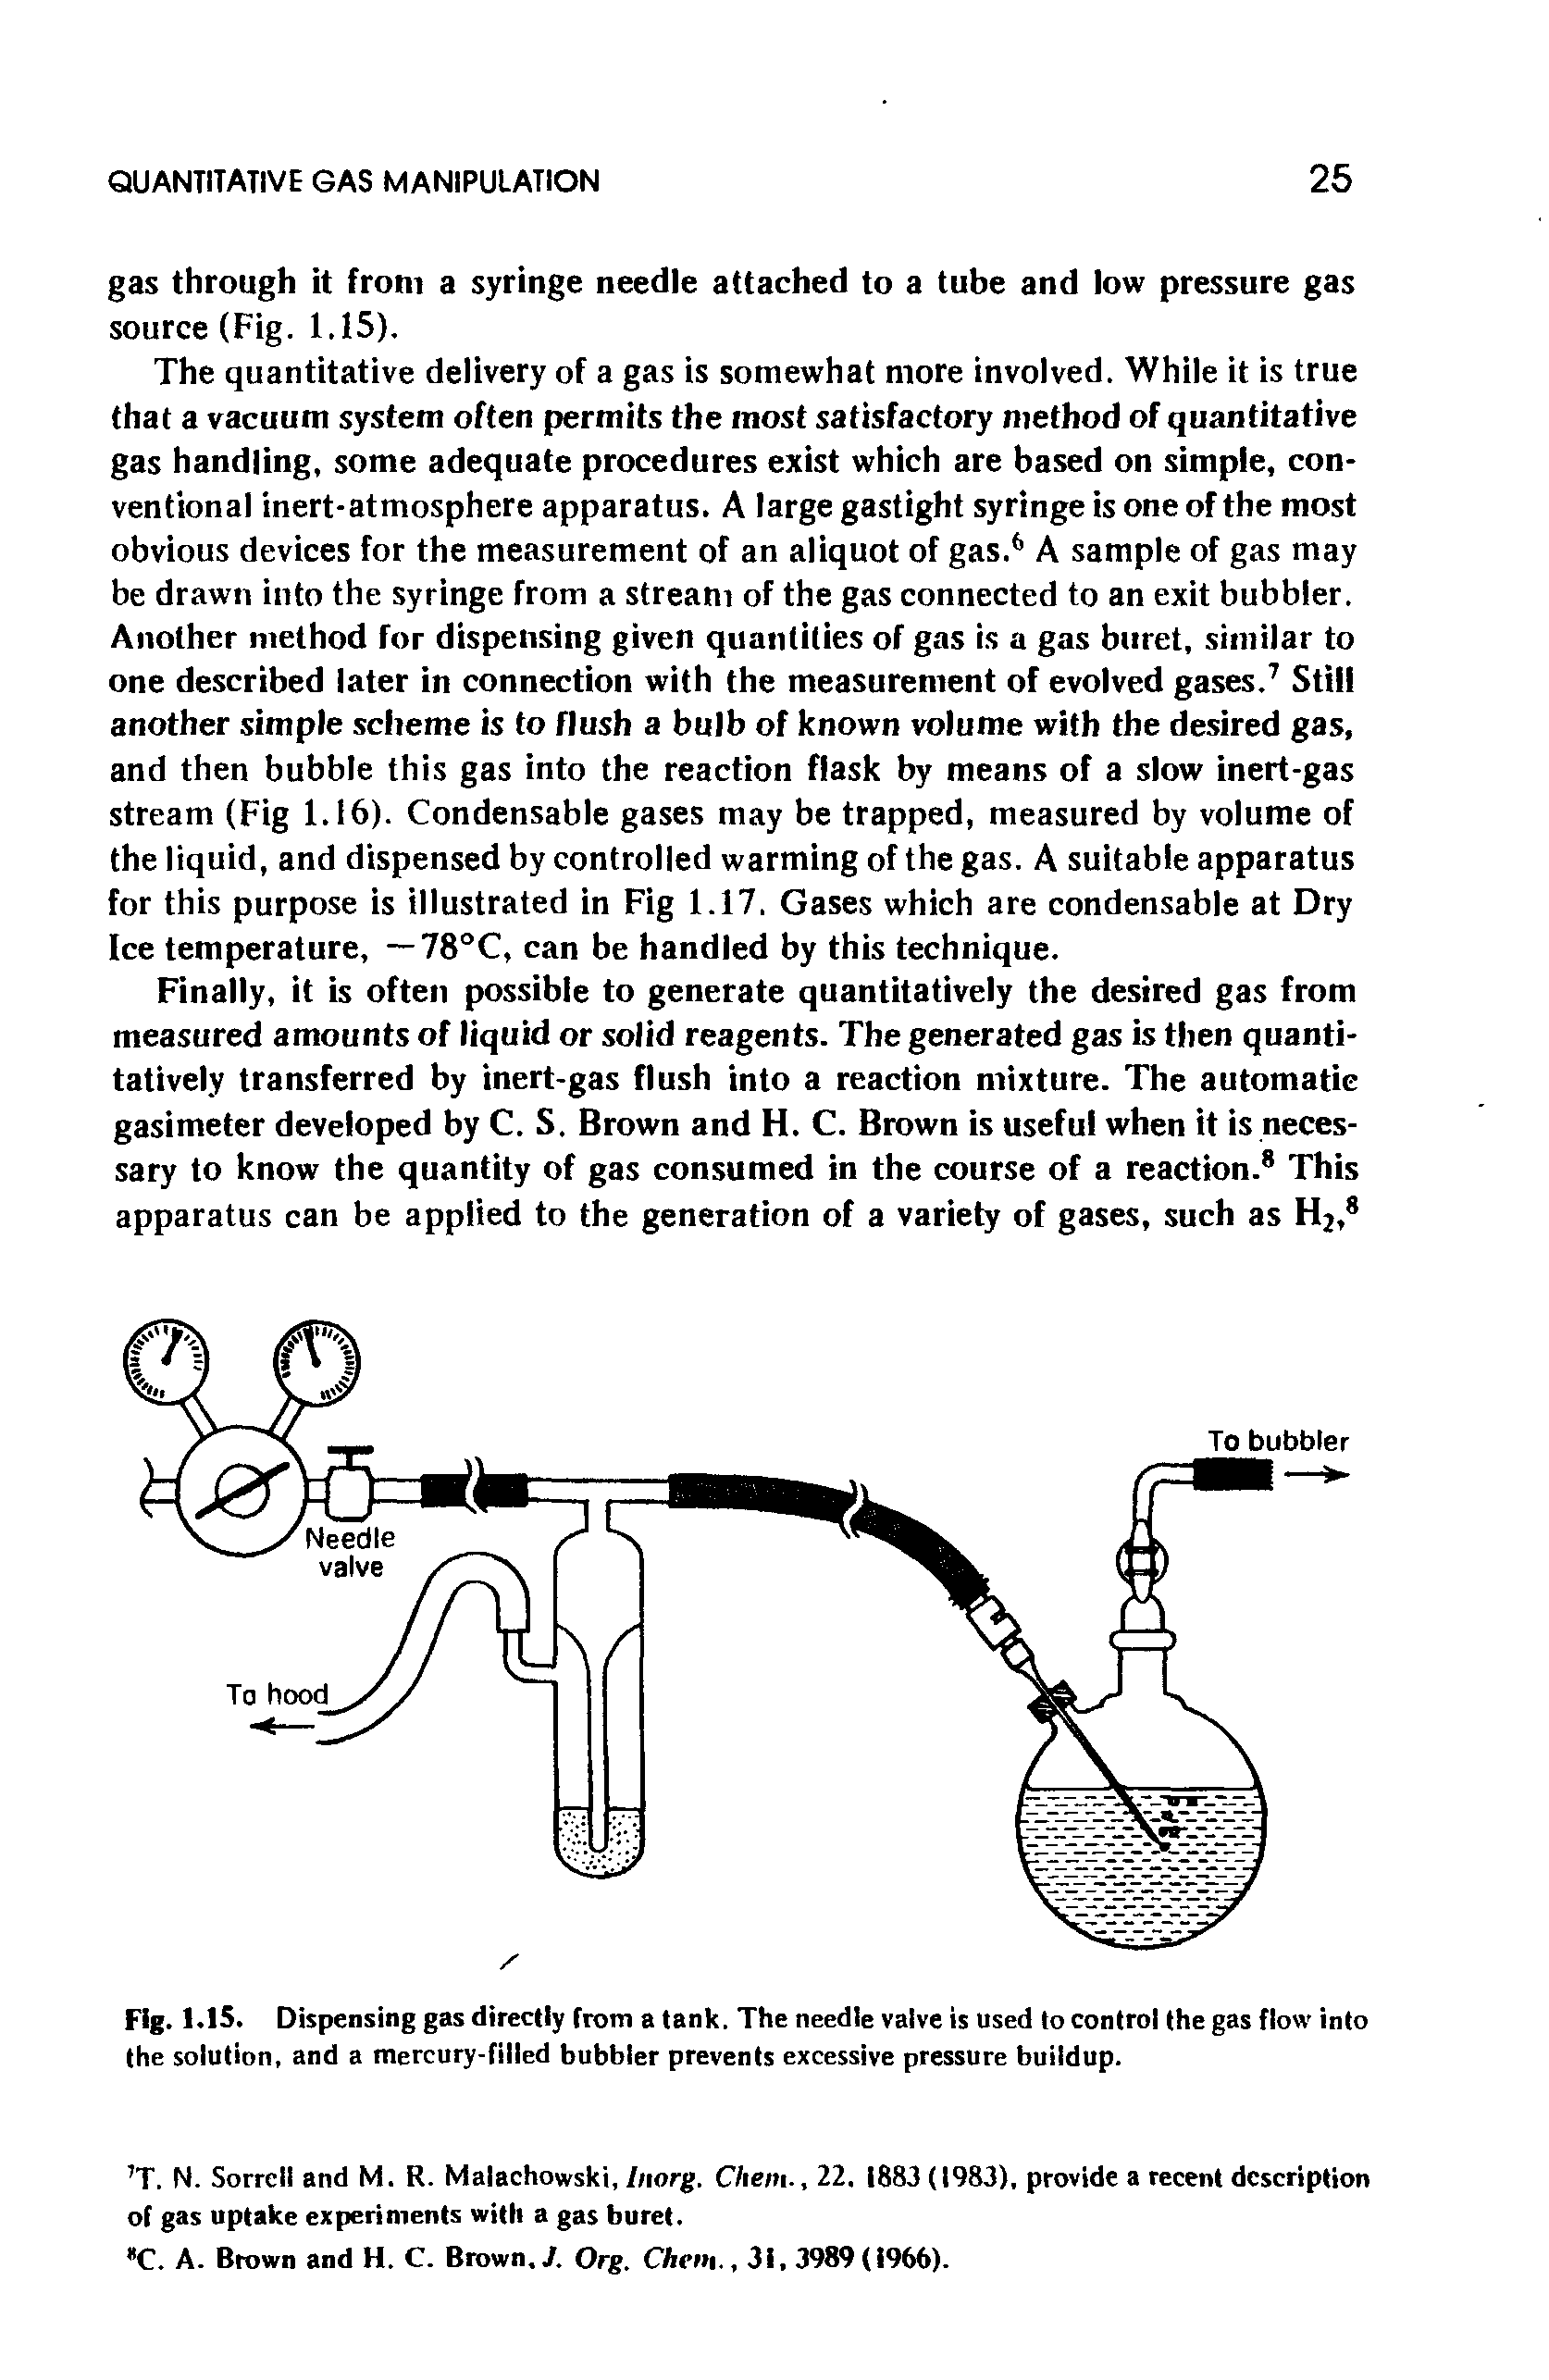 Fig. 1.15. Dispensing gas directly from a tank. The needle valve is used to control the gas flow into the solution, and a mercury-filled bubbler prevents excessive pressure buildup.